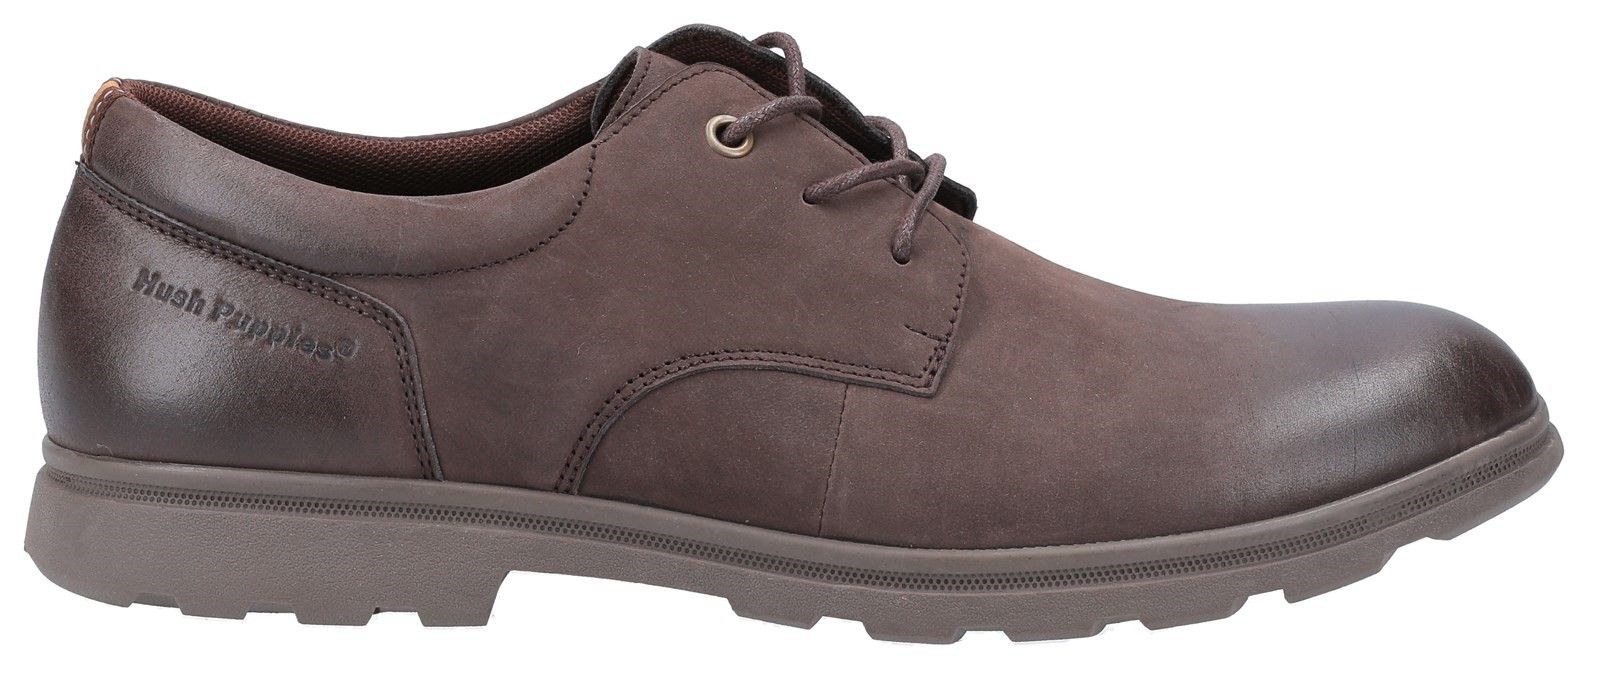 Men's classic derby lace up shoe Trevor; perfect for relaxed day-to-day styling with comfortable Nubuck leather uppers, padded collar, breathable textile lining and lightweight, flexible rubber sole for all day comfort.Nubuck leather upper. 
Lace up fastening. 
Padded collar for extra comfort. 
Breathable textile lining. 
Memory foam comfort insole.